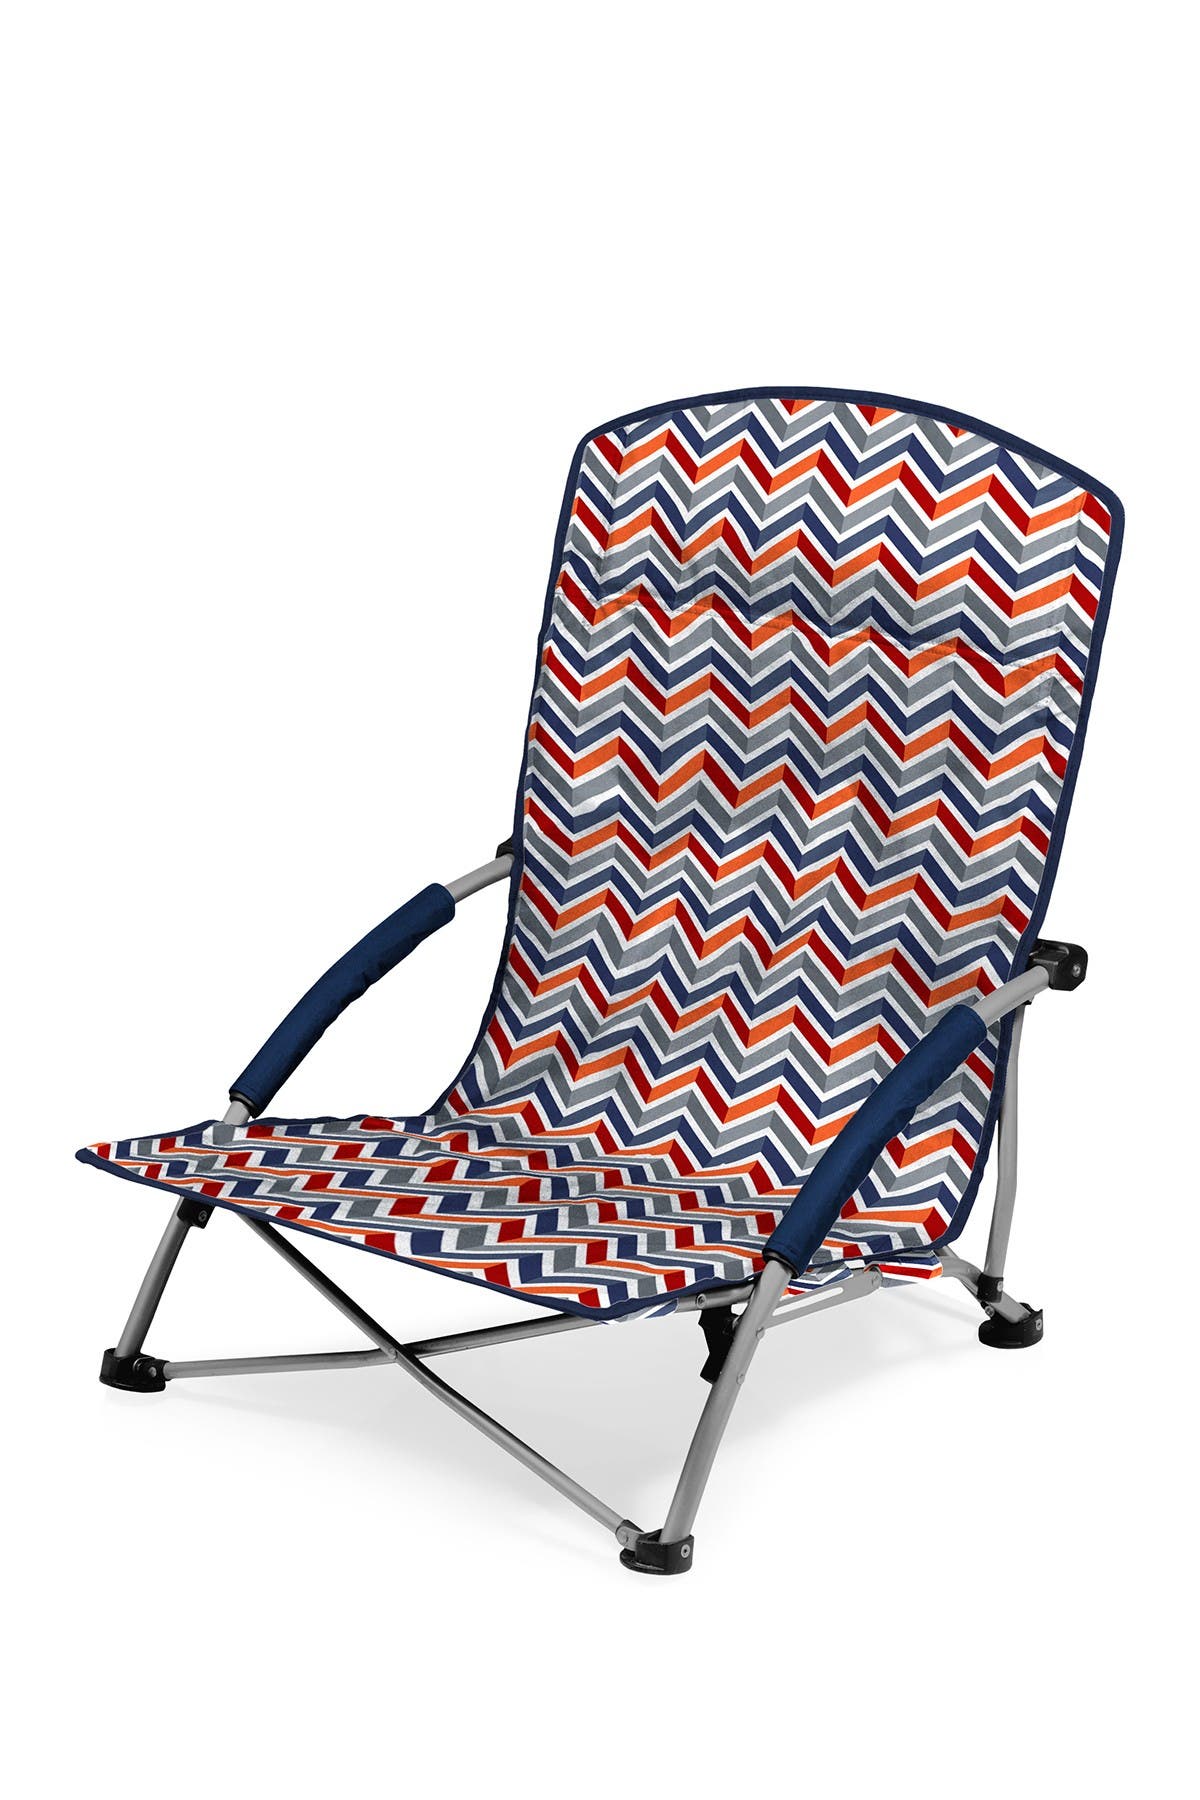 picnic time  tranquility chair portable beach chair  nordstrom rack